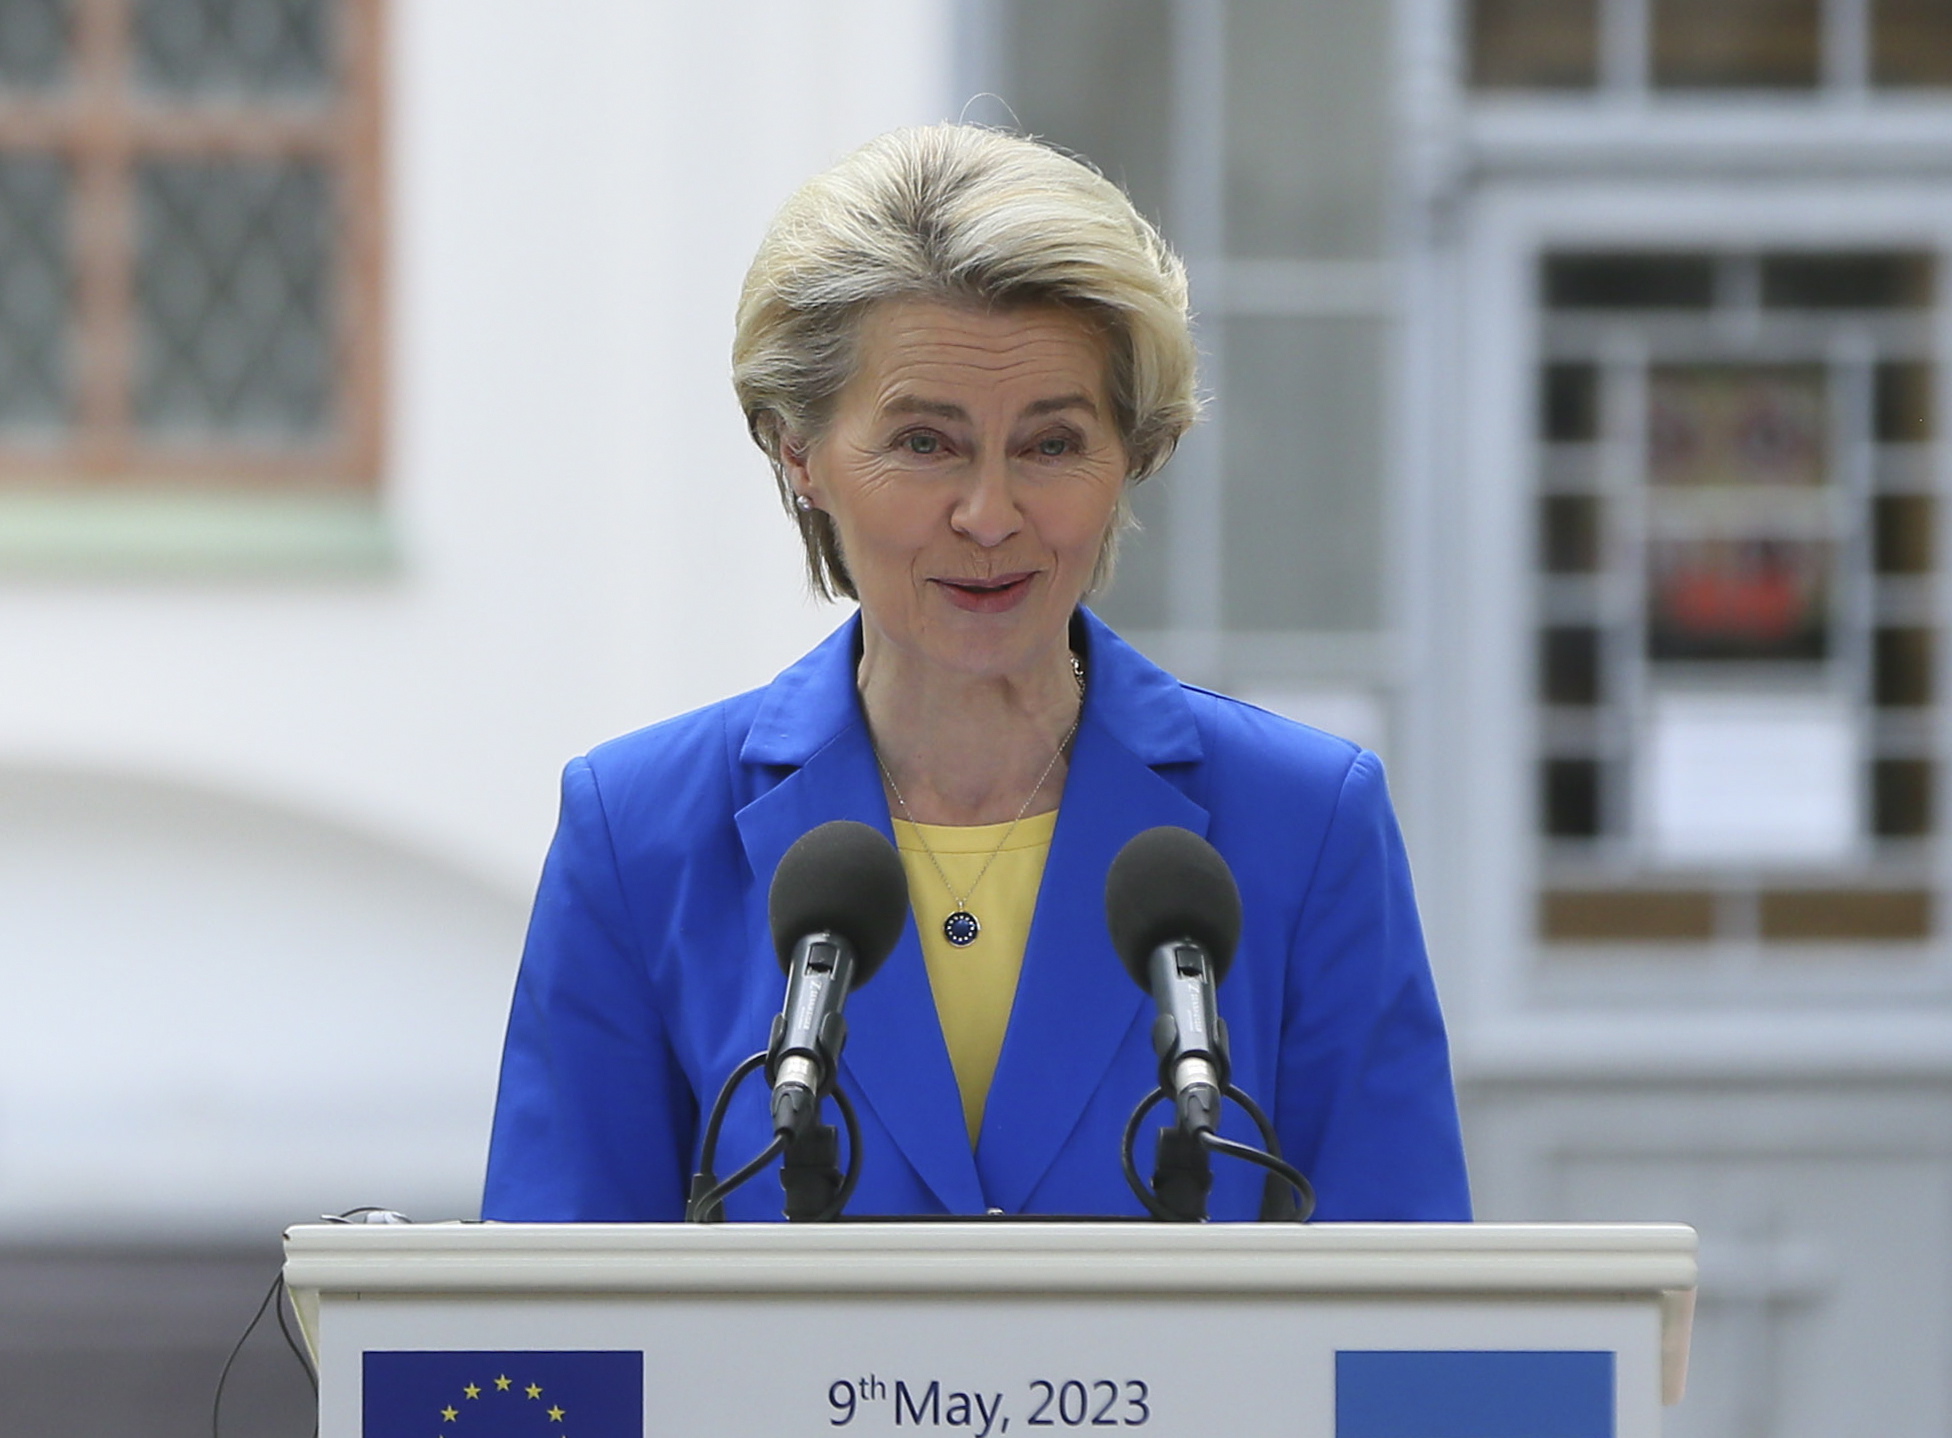 Kyiv (Ukraine), 09/05/2023.- The President of the European Commission Ursula von der Leyen speak to members of the media in a joint news conference with Ukraine's President Zelensky (unseen) near the St. Sophia Cathedral in Kyiv, Ukraine, 09 May 2023. Von der Leyen arrived in Kyiv to meet with top Ukrainian officials. President Zelensky announced that from now on May 09 will be annually celebrated as 'Europe Day' in Ukraine. Also on that day, some countries mark the 78th anniversary of Victory Day, the unconditional surrender of Nazi Germany on 08 May 1945, and the Allied Forces' victory, which marked the end of World War II in Europe. (Alemania, Rusia, Ucrania) EFE/EPA/STEPAN FRANKO